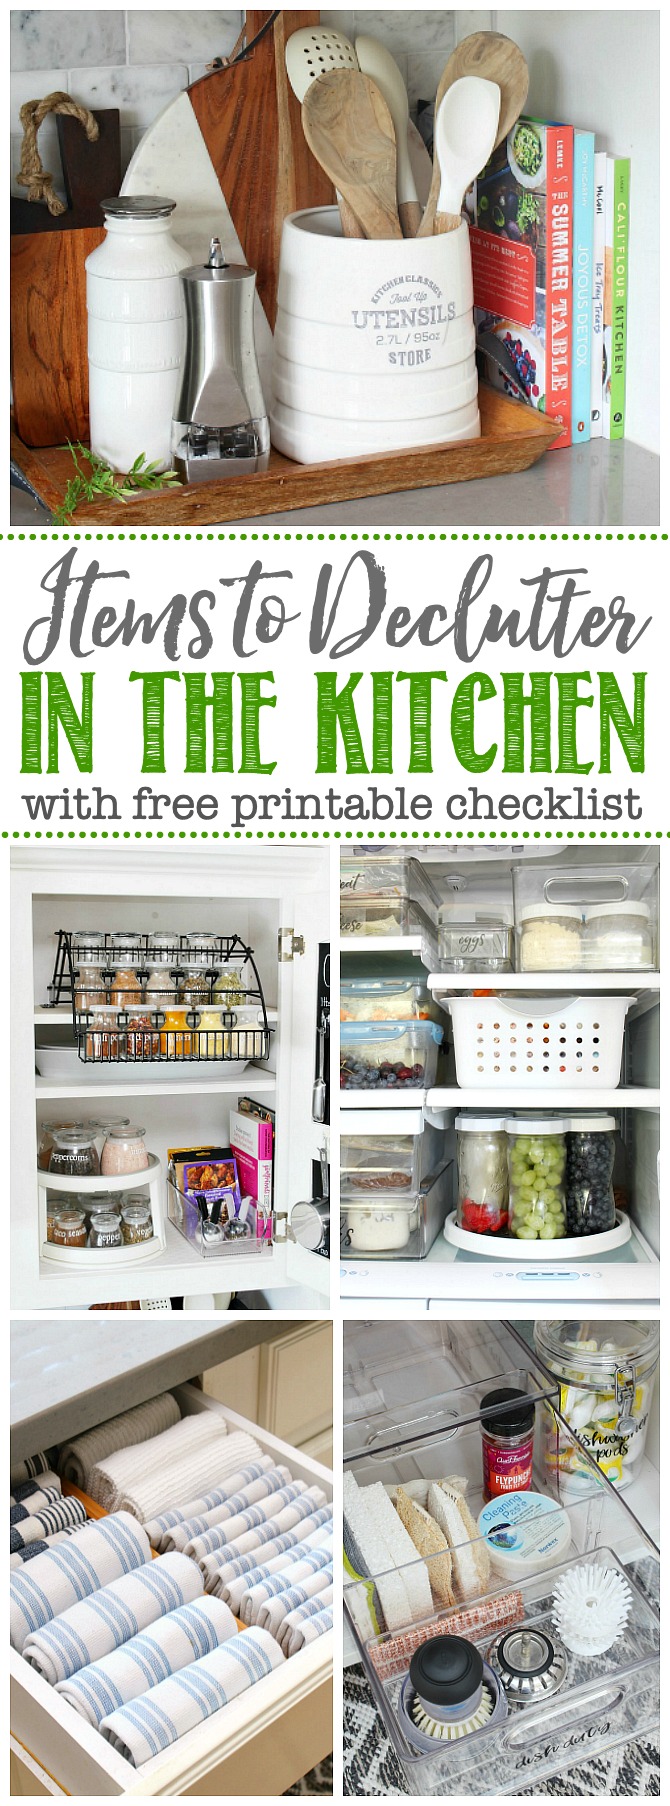 30+ Ways to Declutter Your Kitchen  Home organization, Kitchen  organization, Home diy